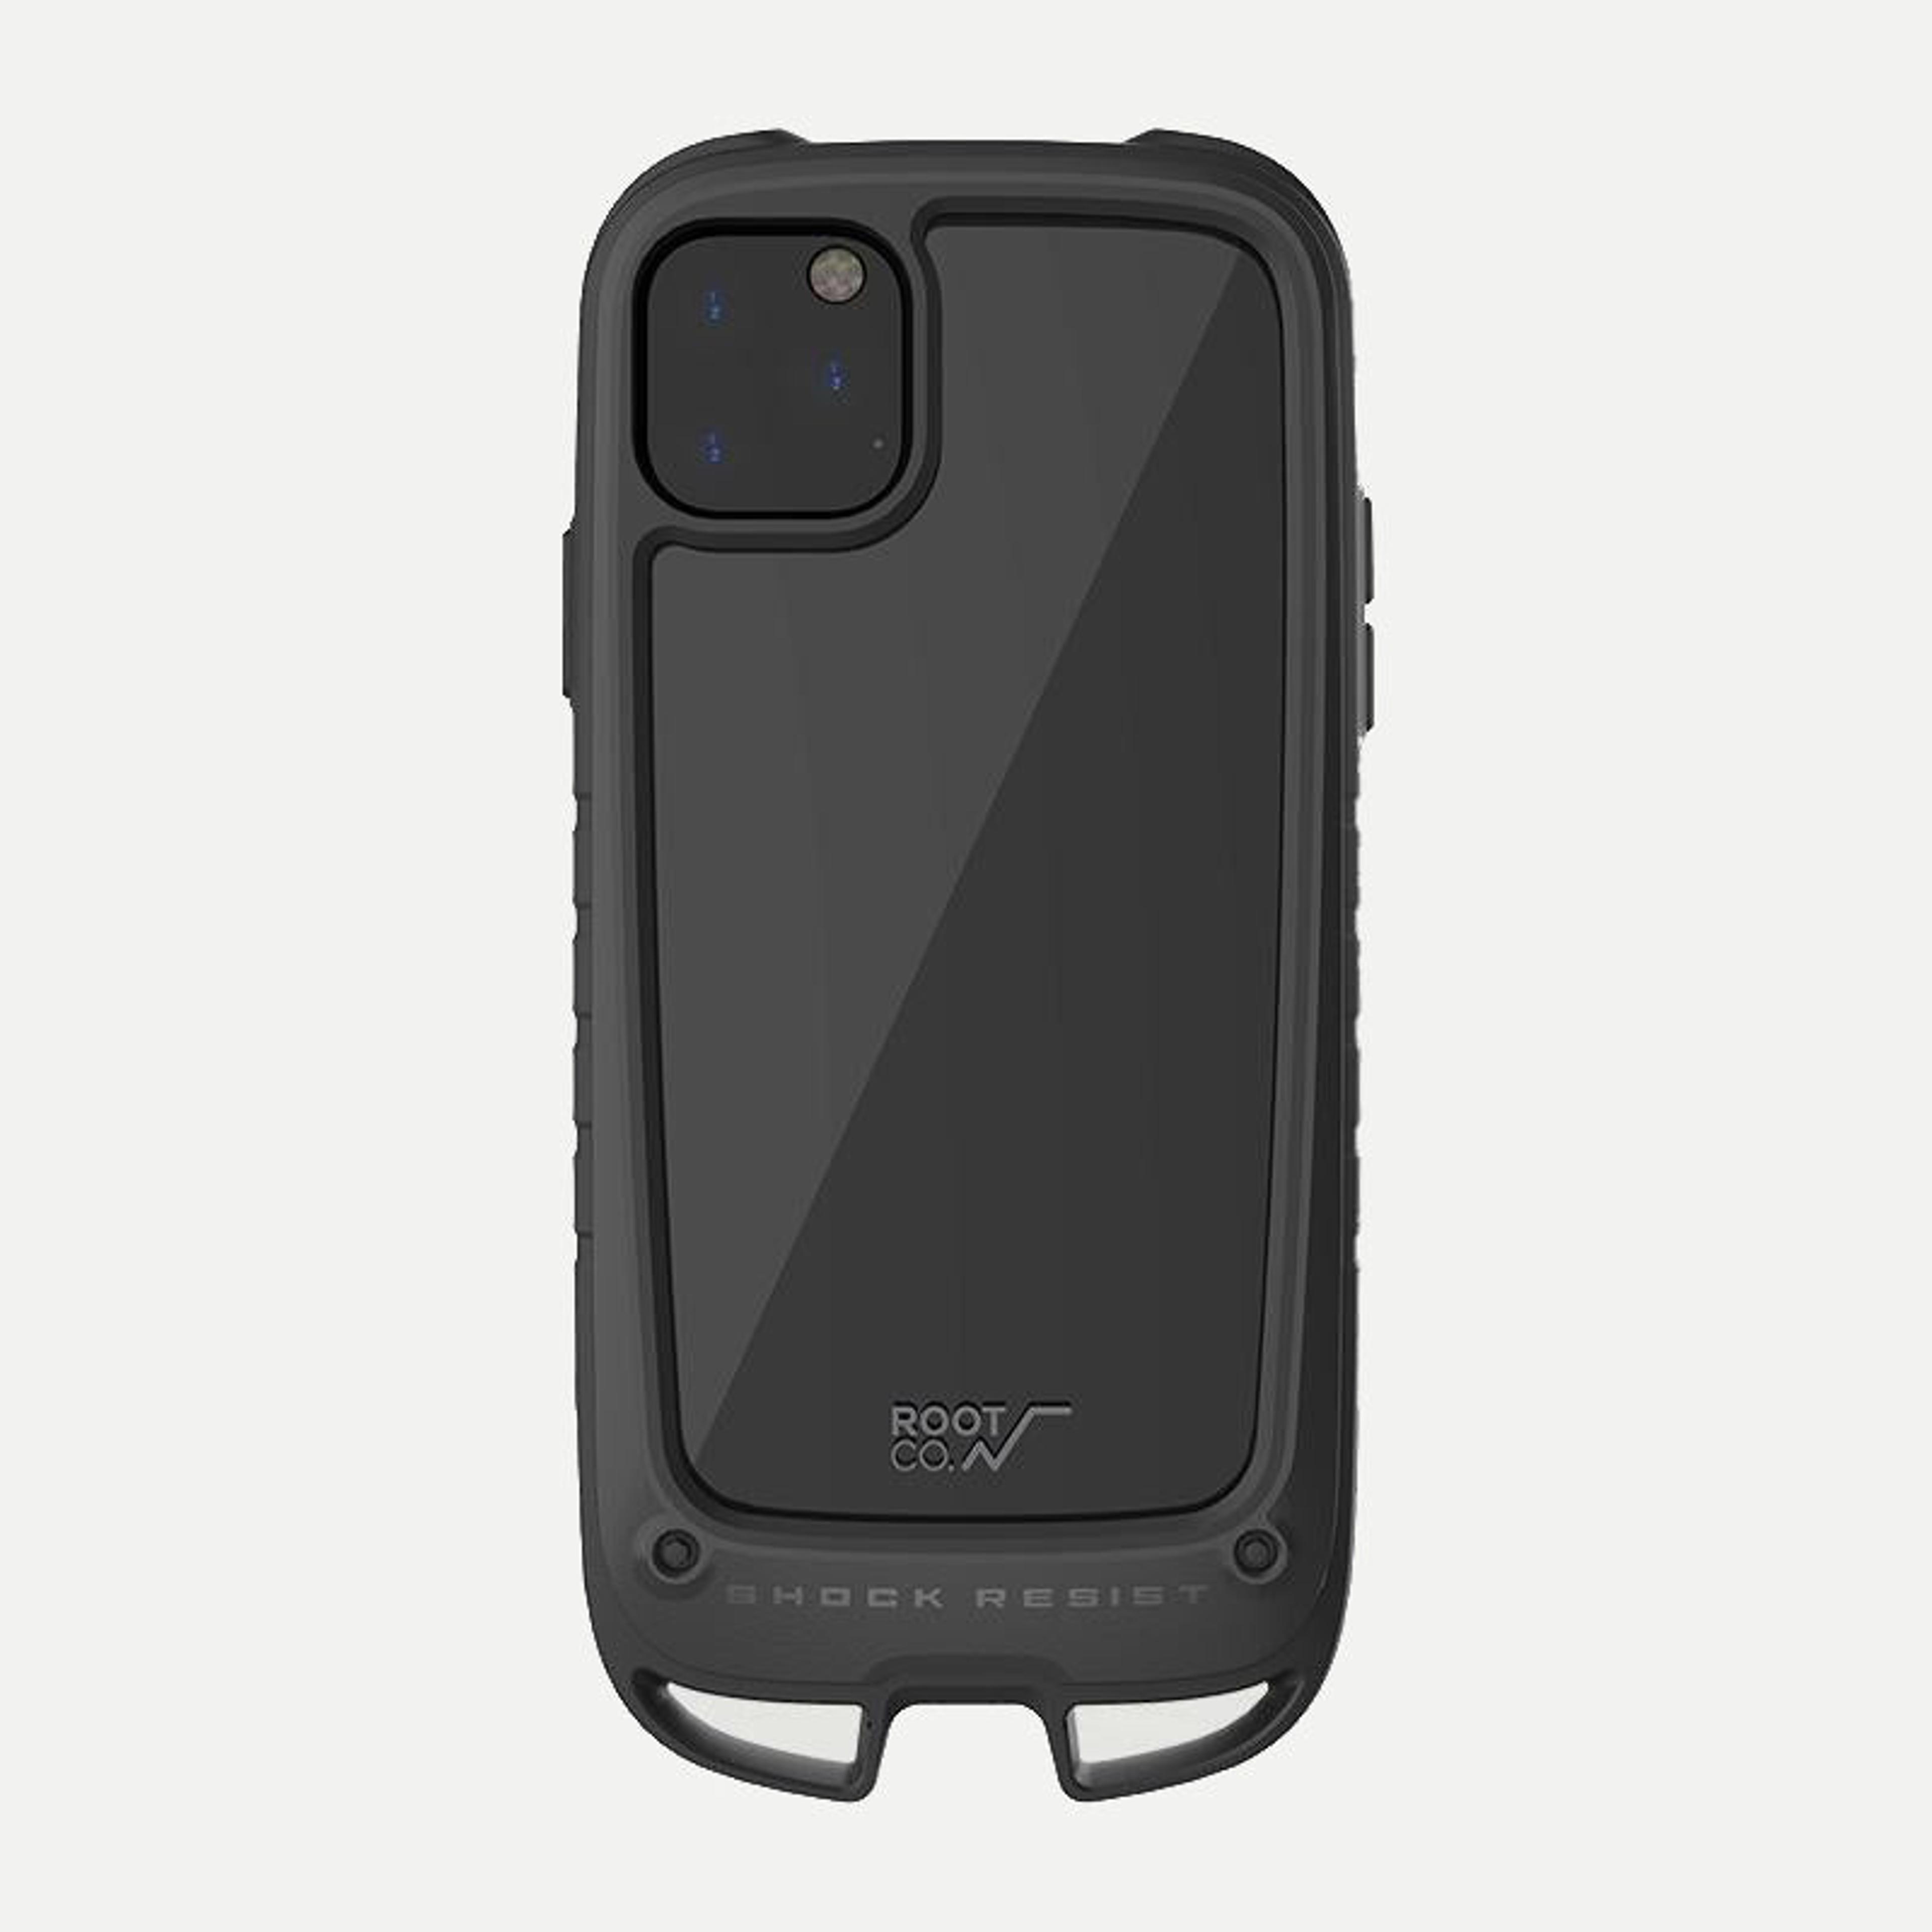 NTWRK - Root Co. Gravity Shock Resist Case + Hold - iPhone 11 Pro Max